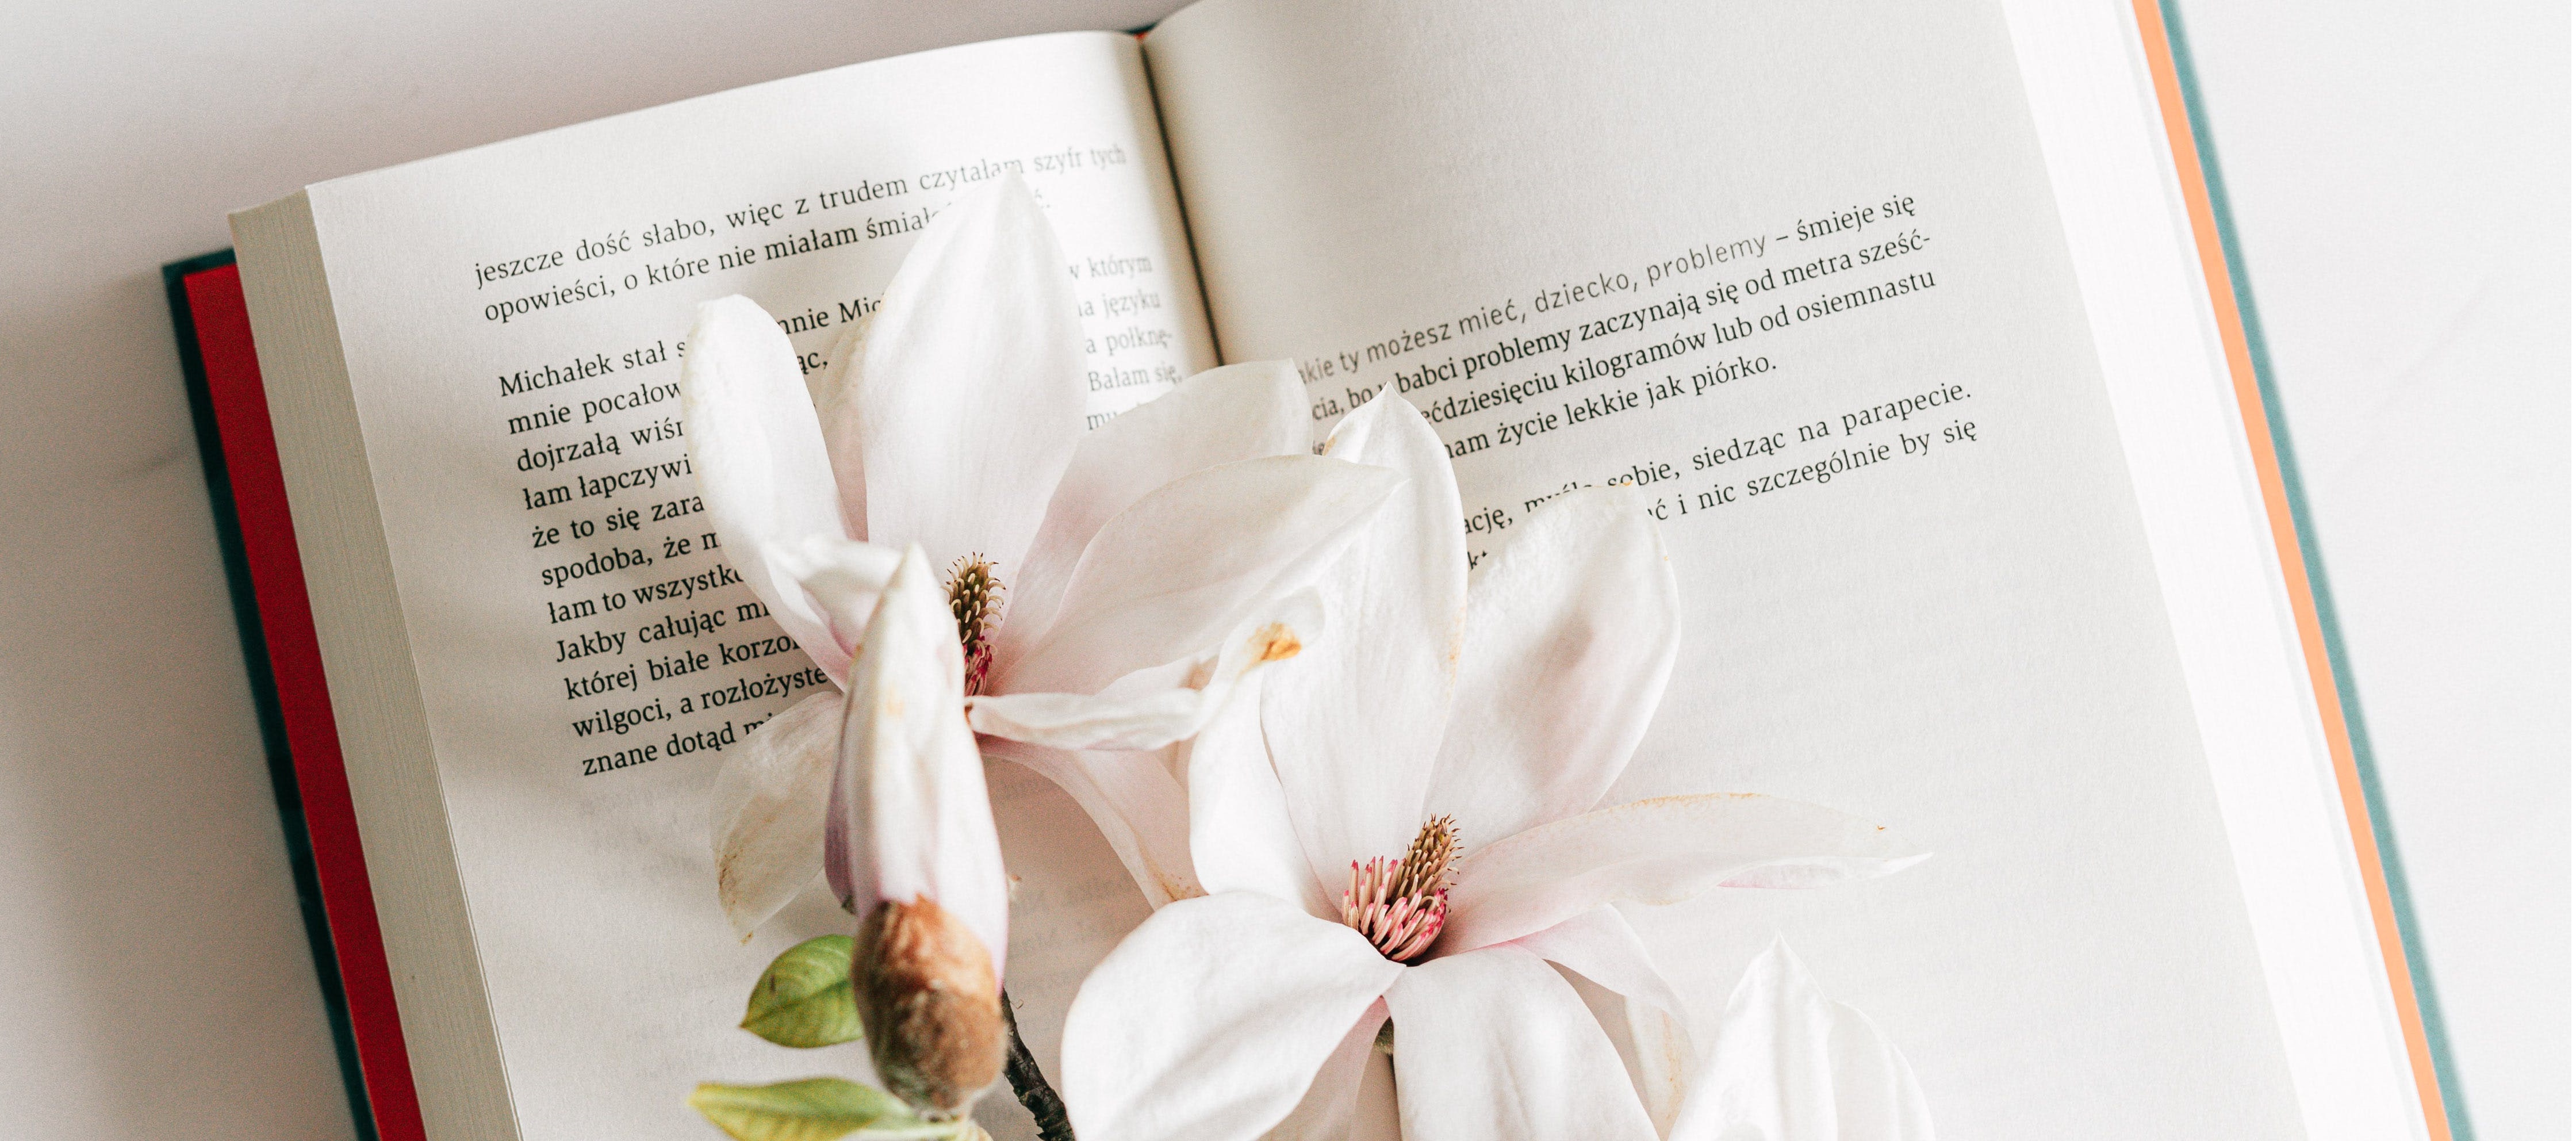 Open book on an off-white background, with blooming magnolias resting on the open book